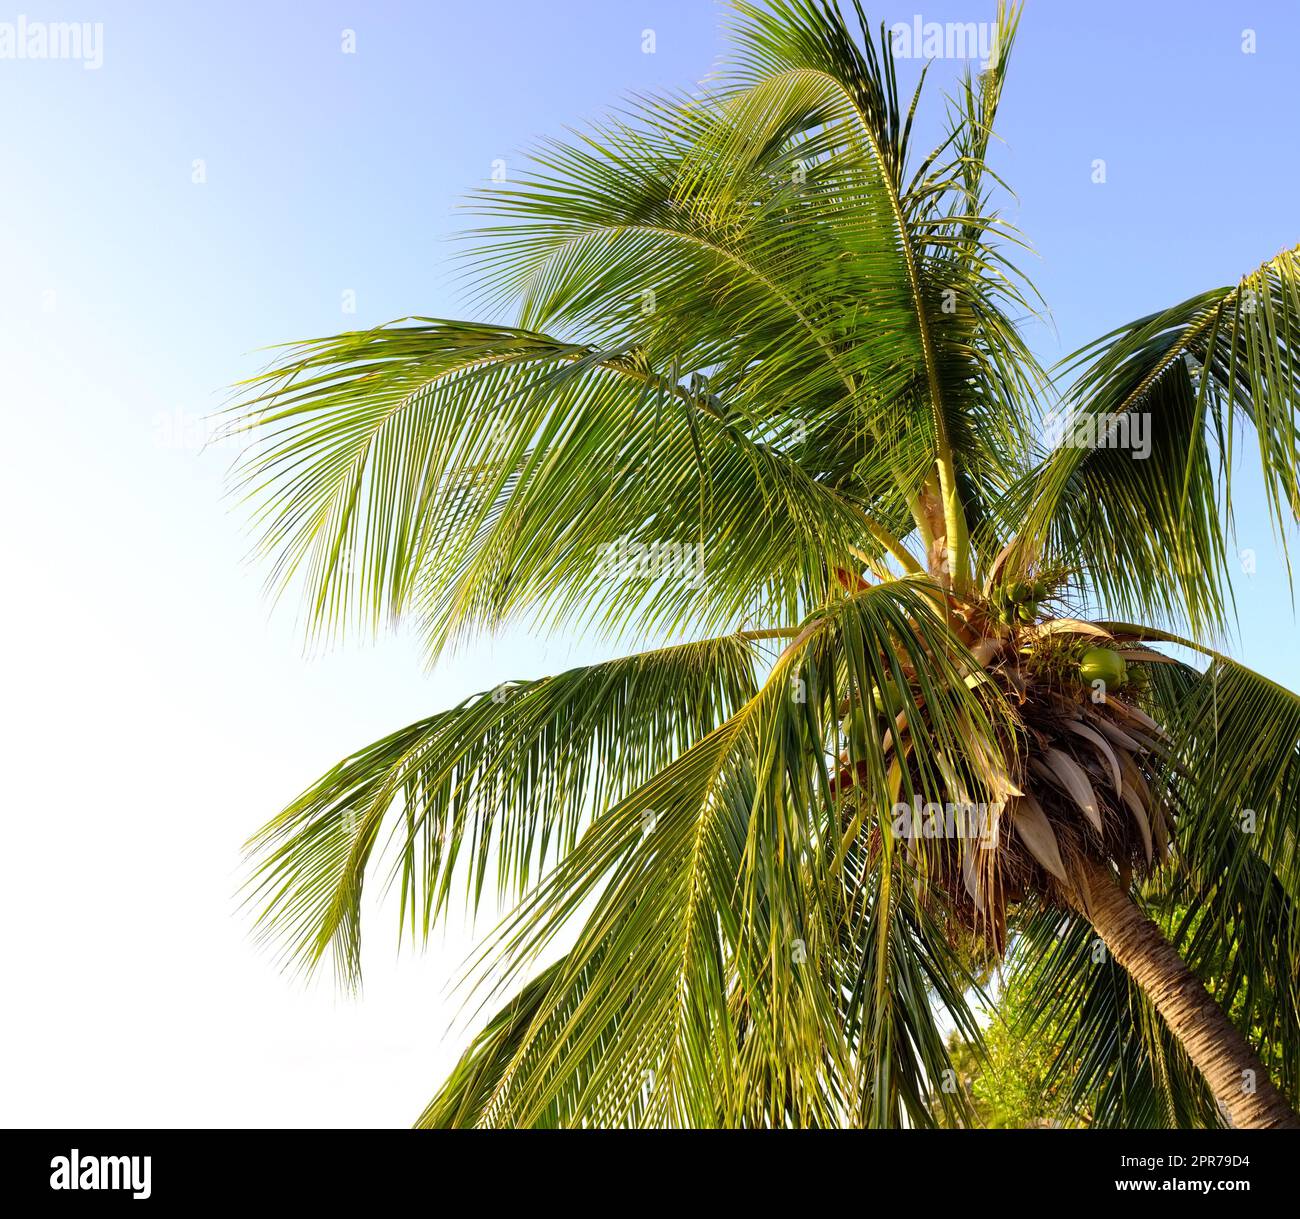 A palm tree against a bright blue sky. A coconut tree with leaves shining under the sun from below. A relaxing exotic island, paradise getaway abroad or a tropical tourism destination Stock Photo